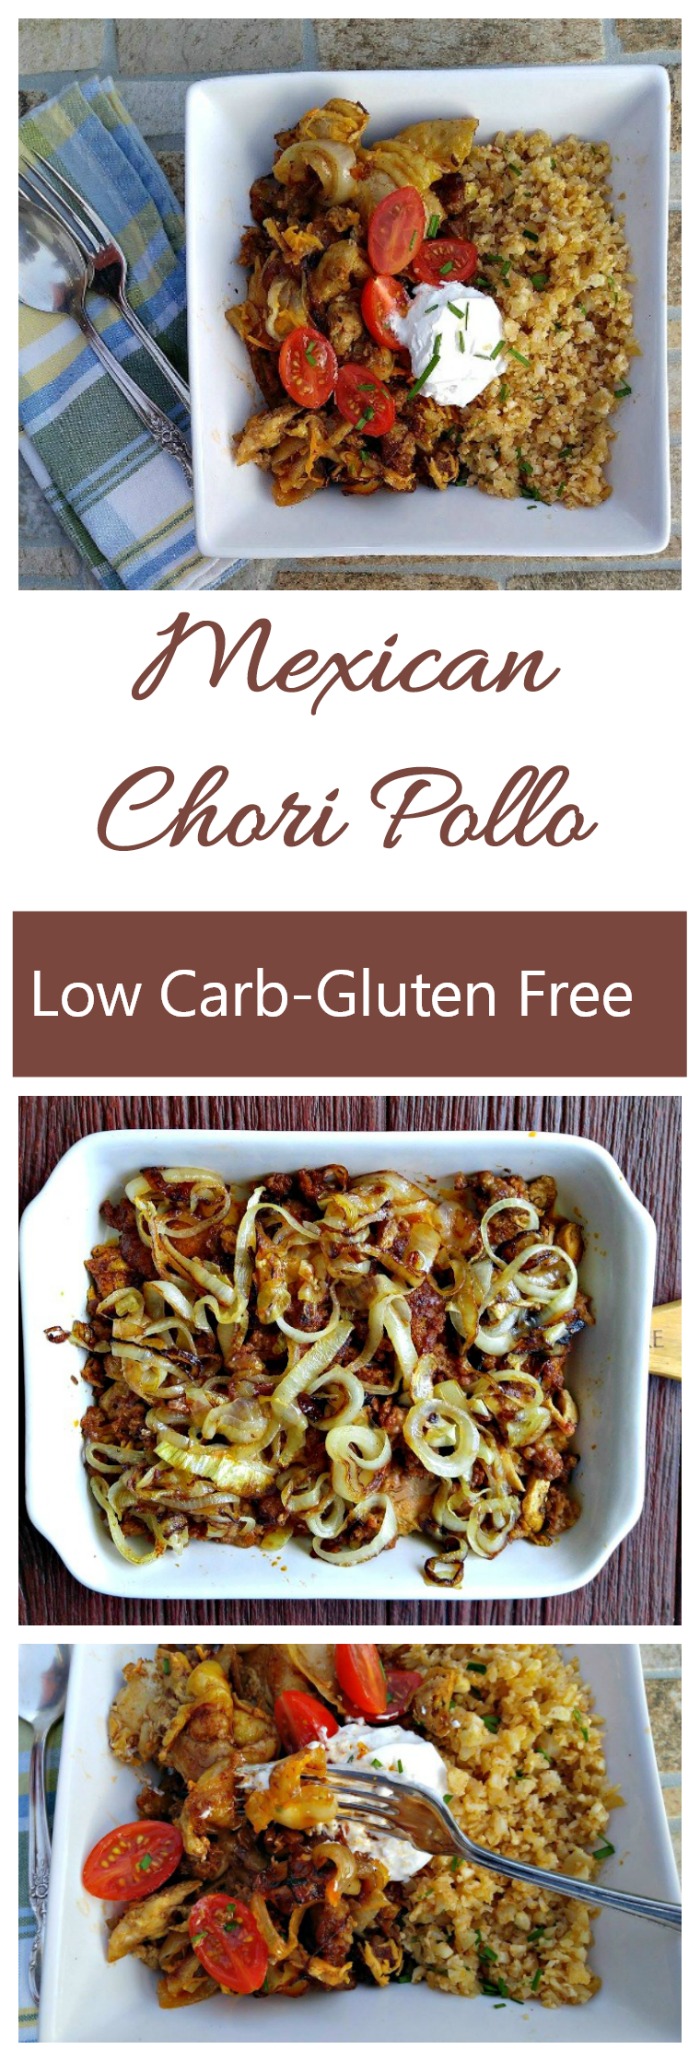 This gluten free Mexican Chori pollo is full of flavor, not too spicy and super easy to make.